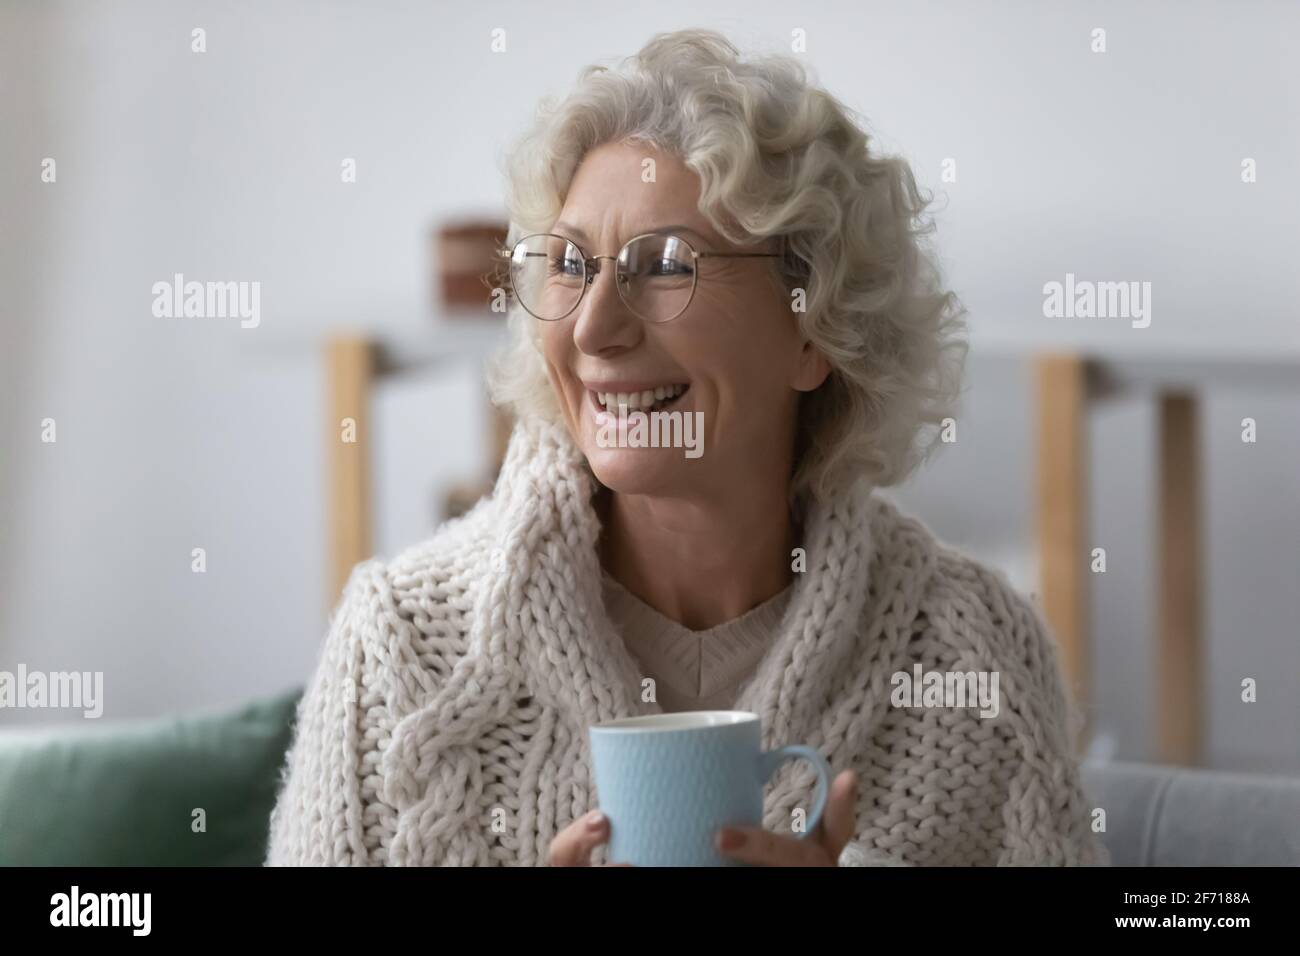 Happy mature 60s lady wrapped in plaid wearing glasses Stock Photo